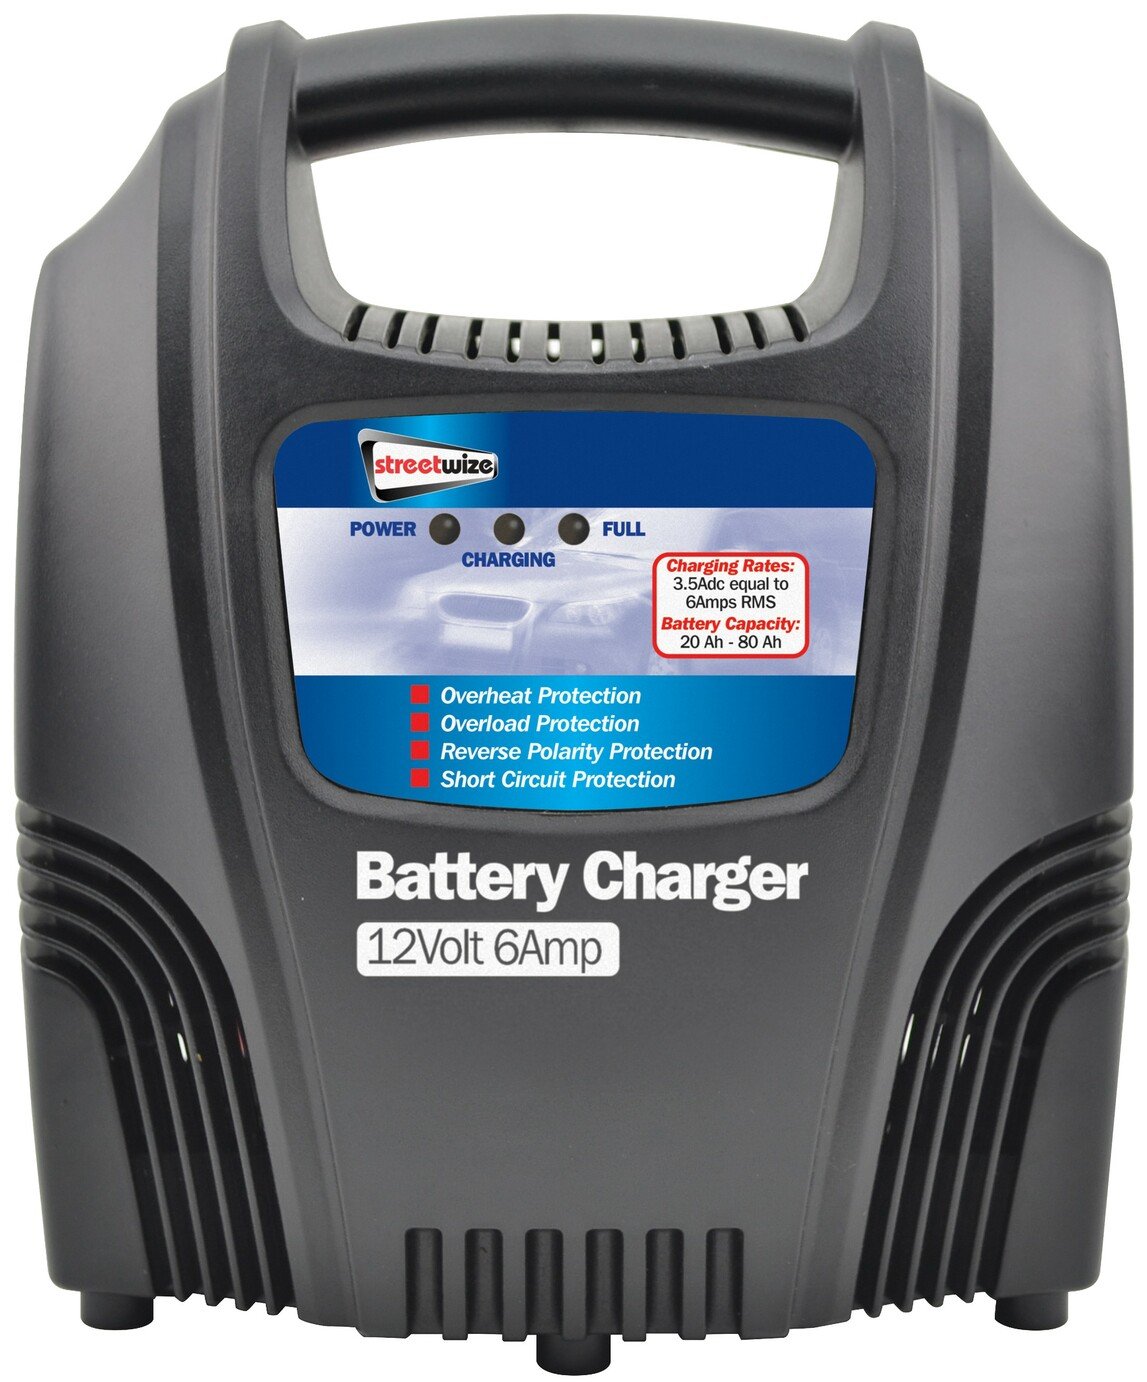 Streetwize 6 Amp 12V Compact Battery Charger Review